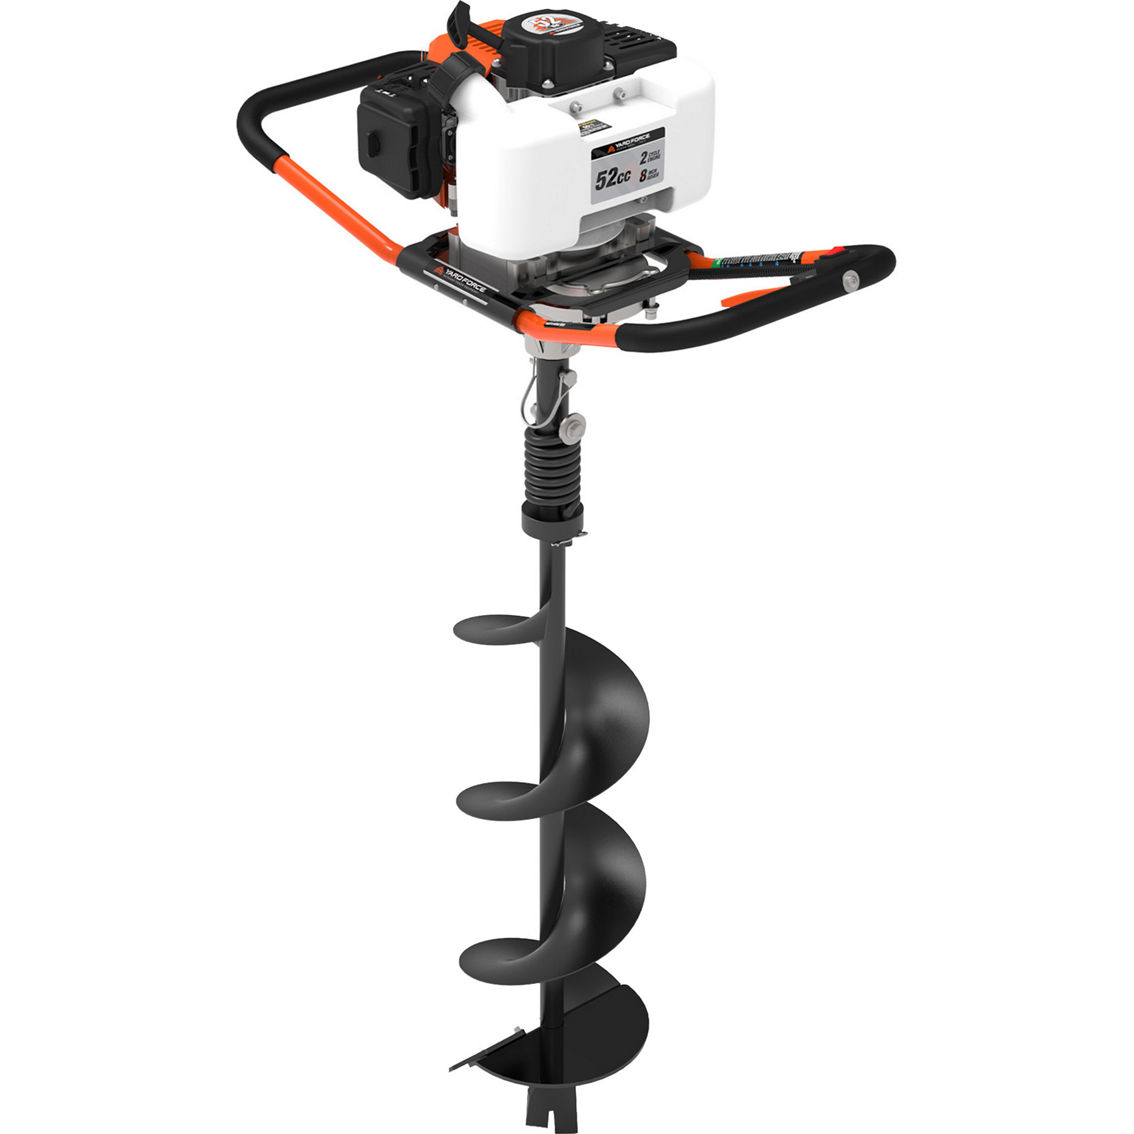 Yard Force 52cc Gas-Powered 8 in. Earth Auger Post Hole Digger - Image 2 of 9